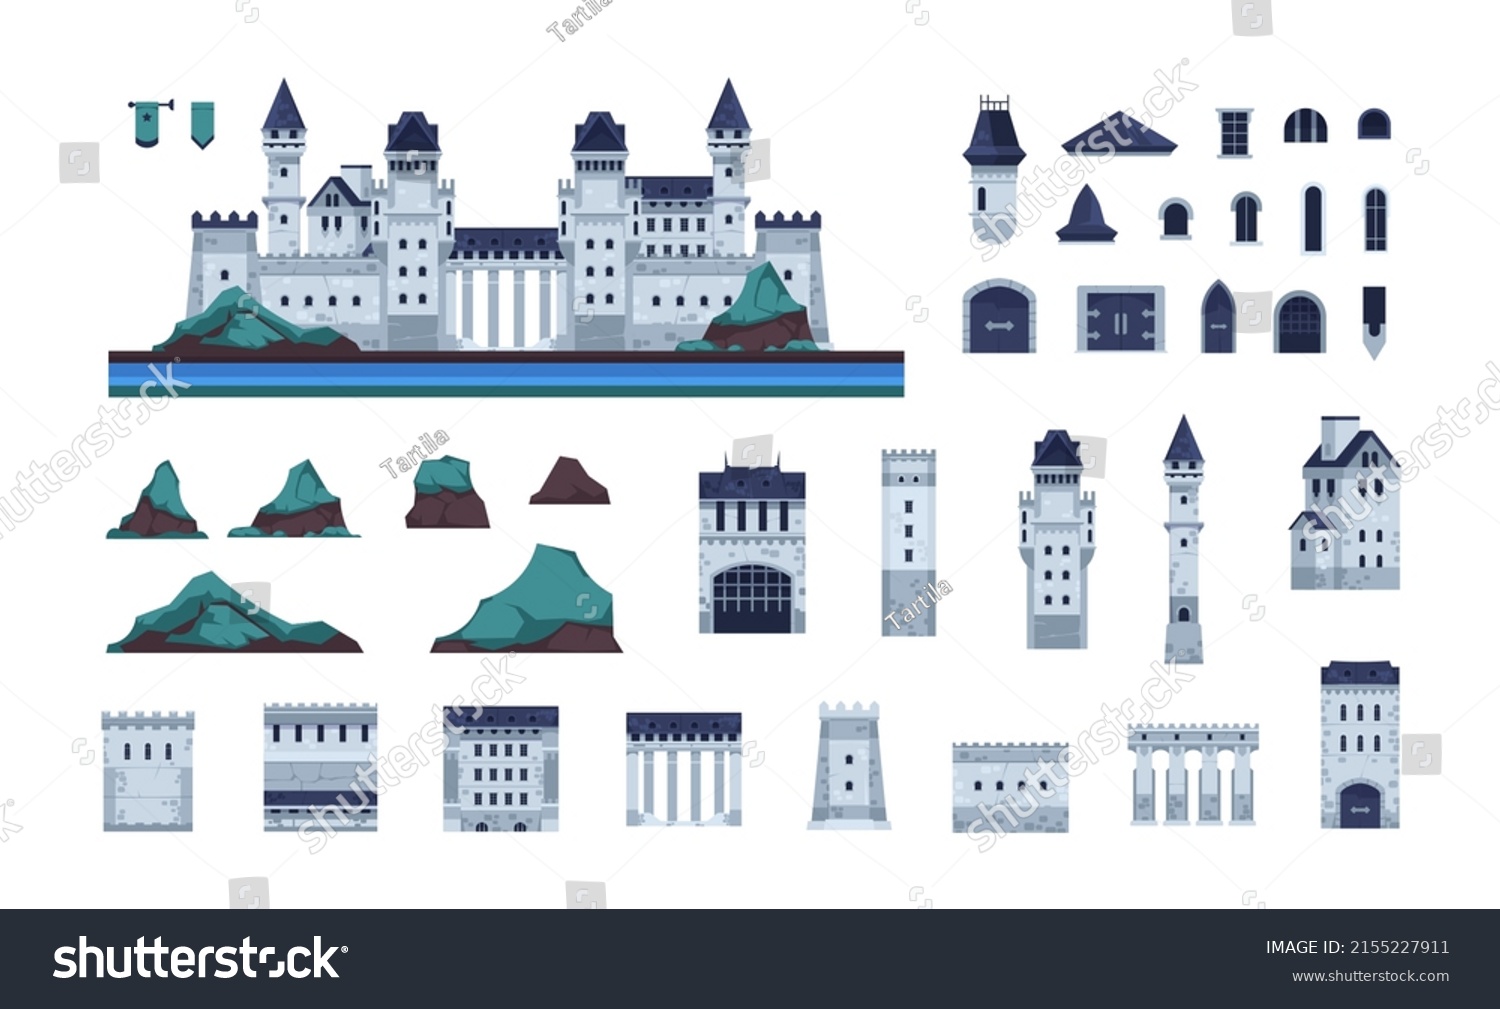 SVG of Castle constructor. Cartoon fortress kit, towers walls roof and gate, medieval bastion elements. Vector fantasy ancient architecture elements. Gothic architecture palace exterior, entrance, windows svg